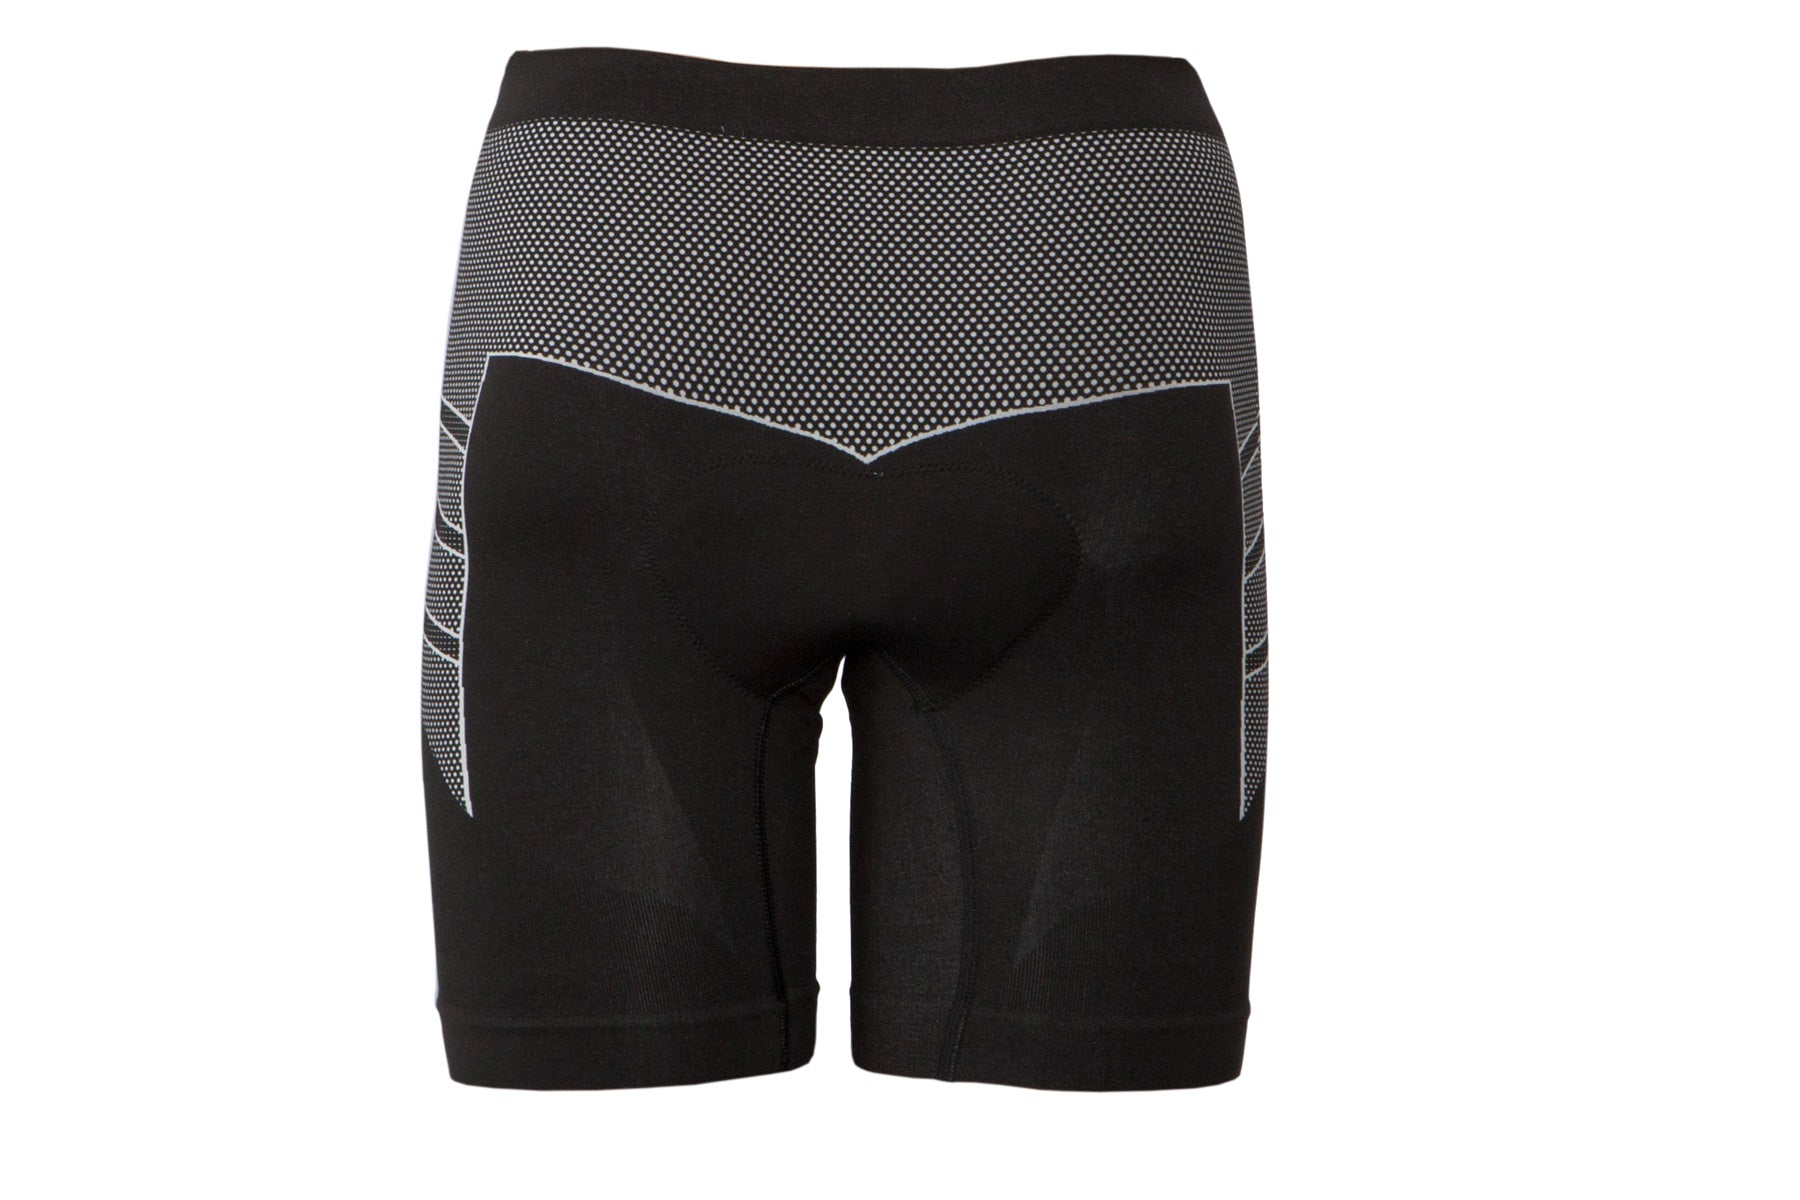 On-One Performance Fit Under Shorts With Pad